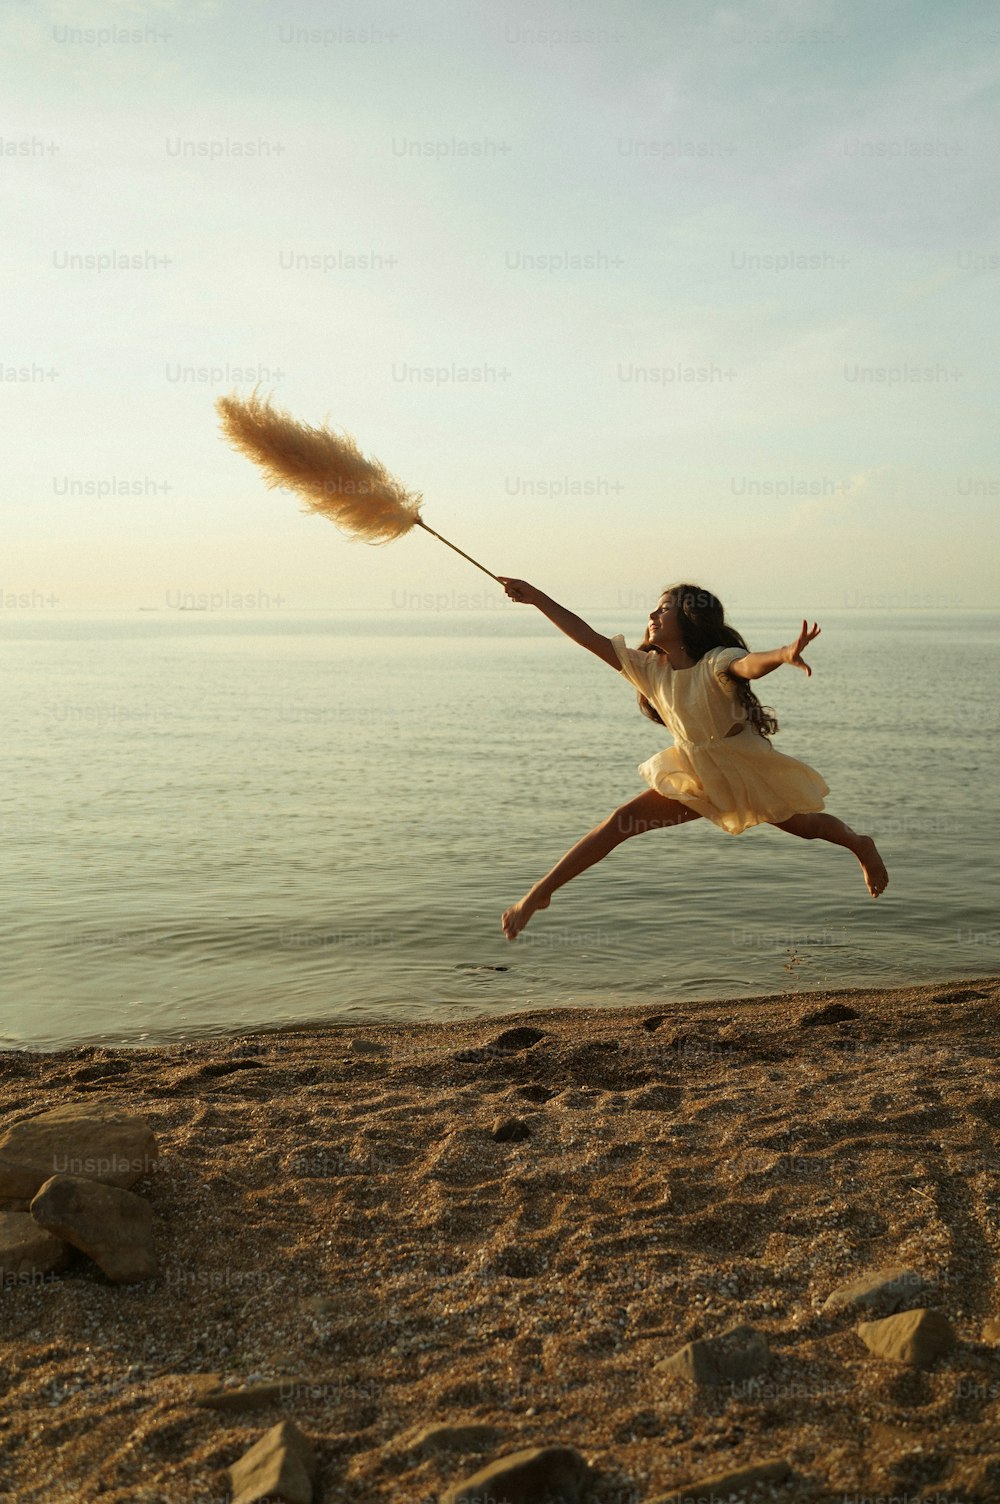 a woman jumping in the air while holding a broom